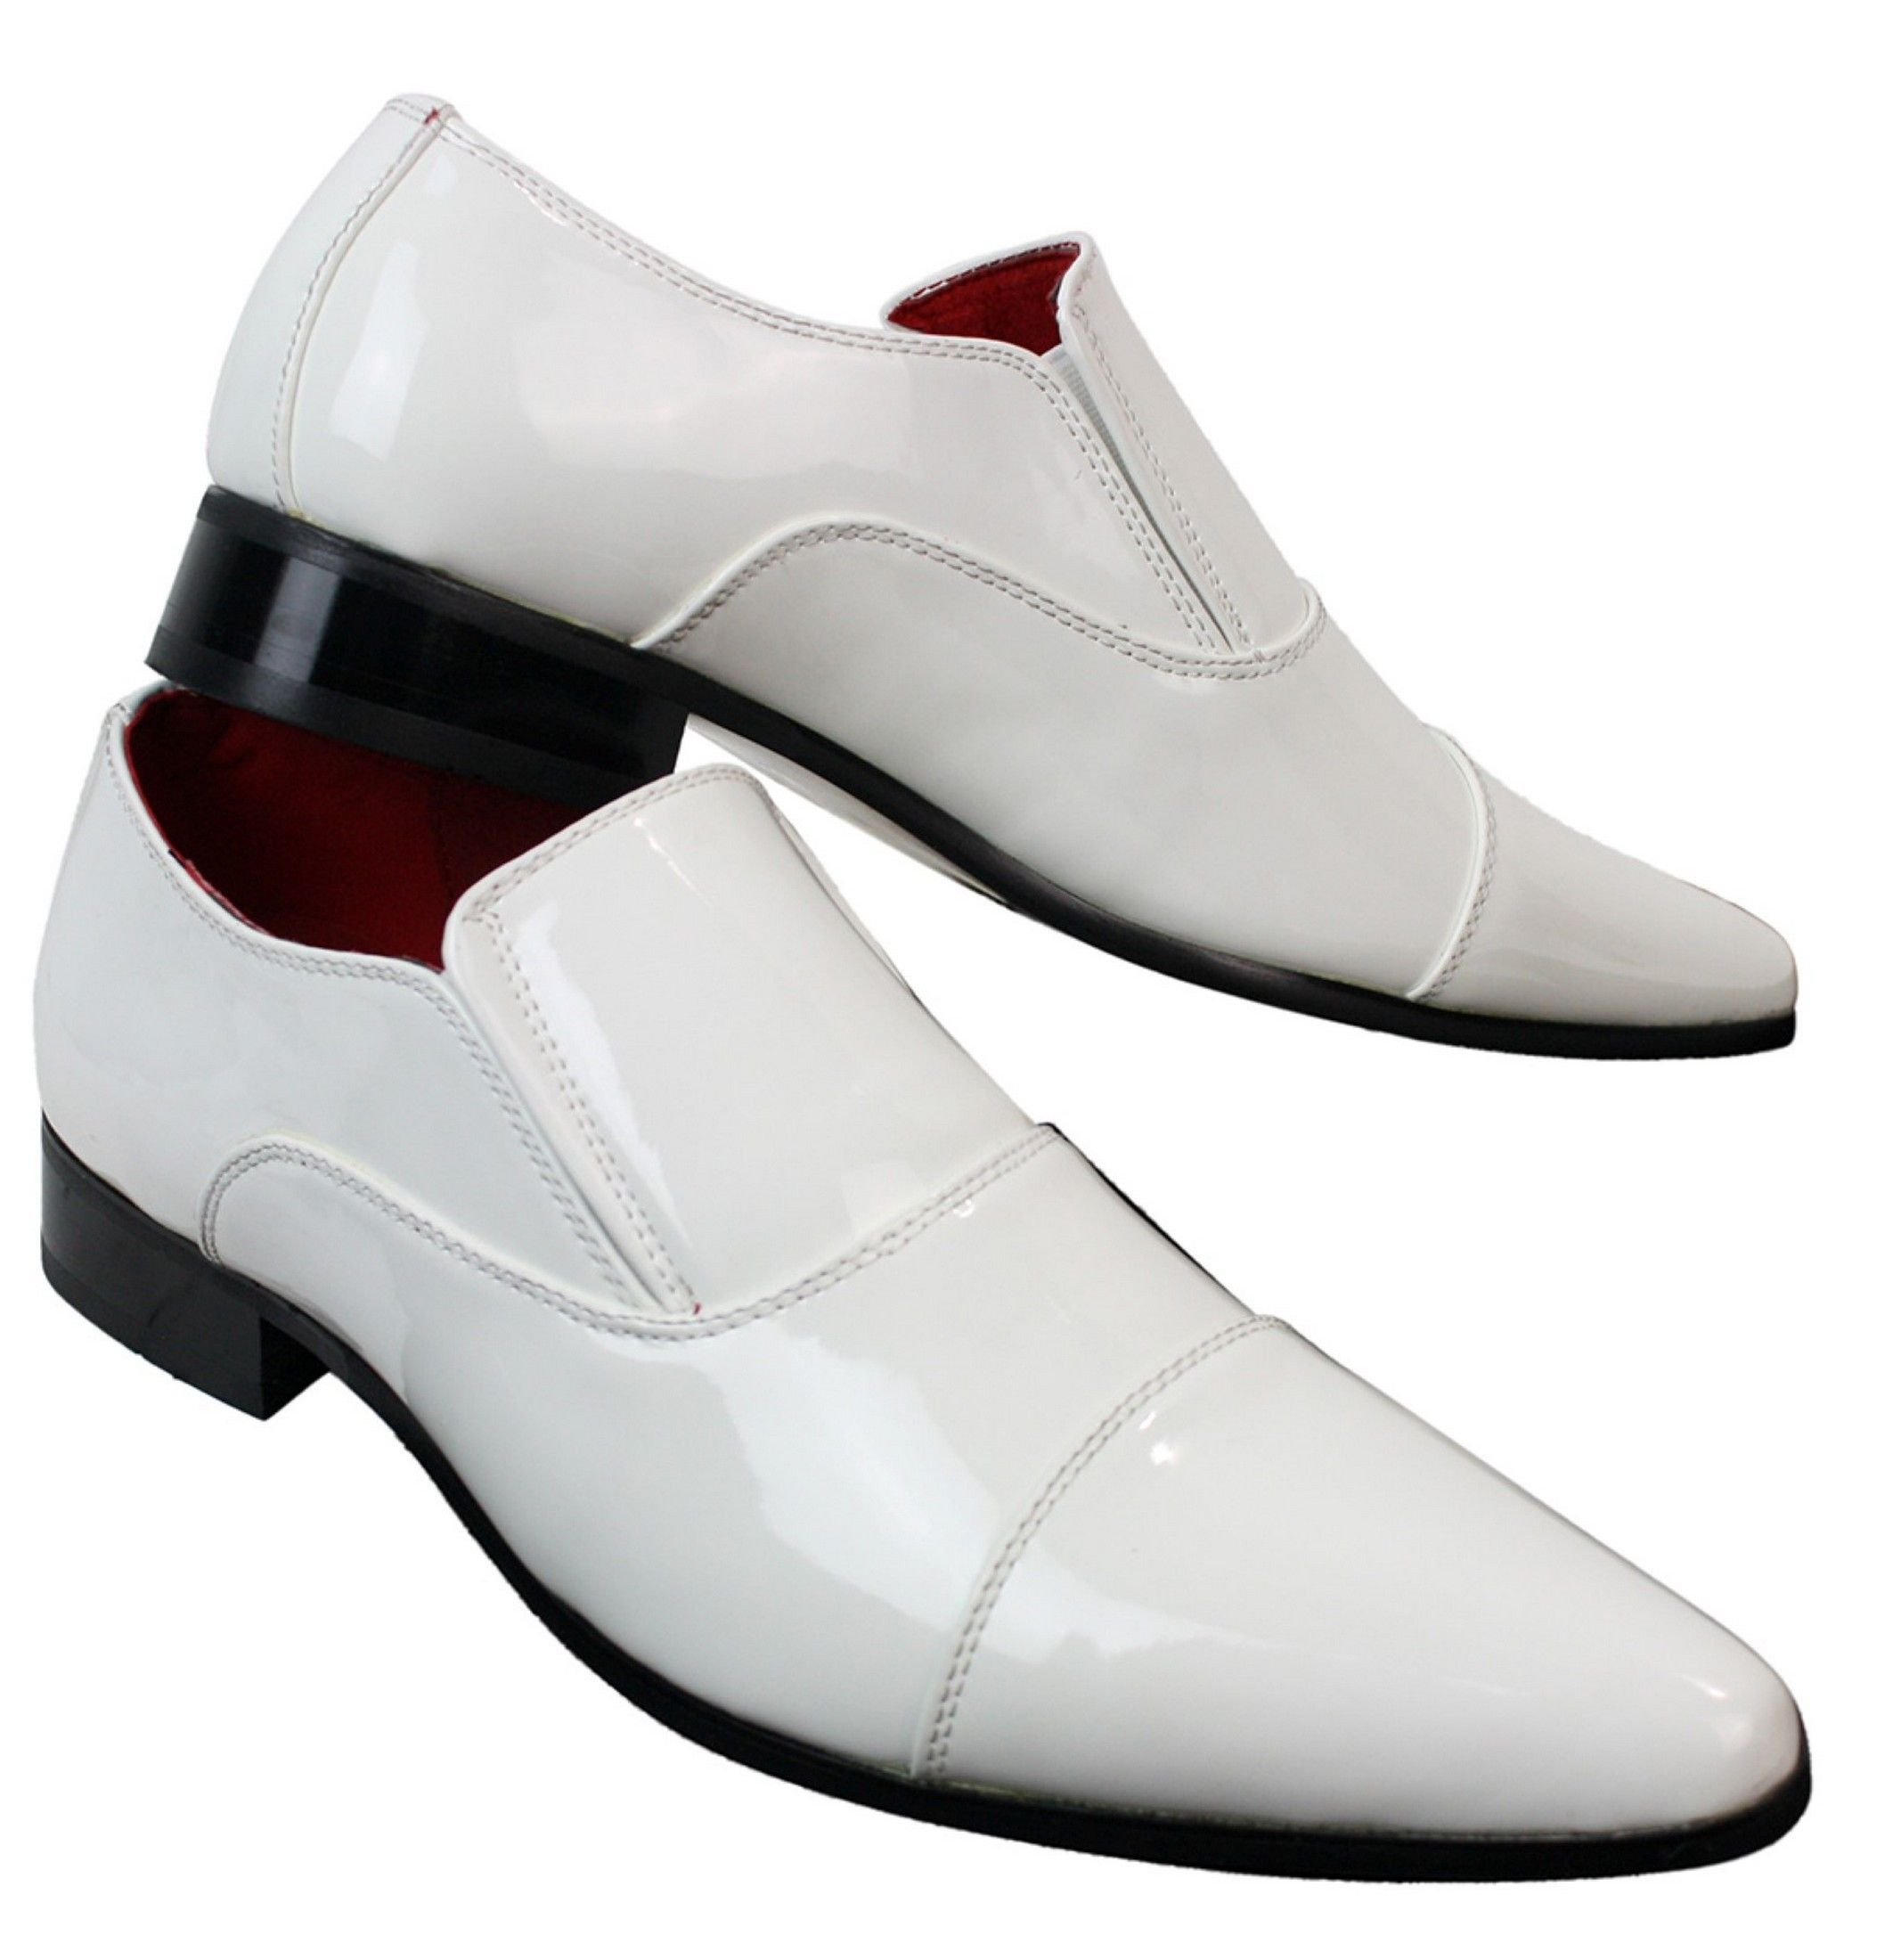 Mens Smart Formal Slip On White Patent Shiny Shoes Leather